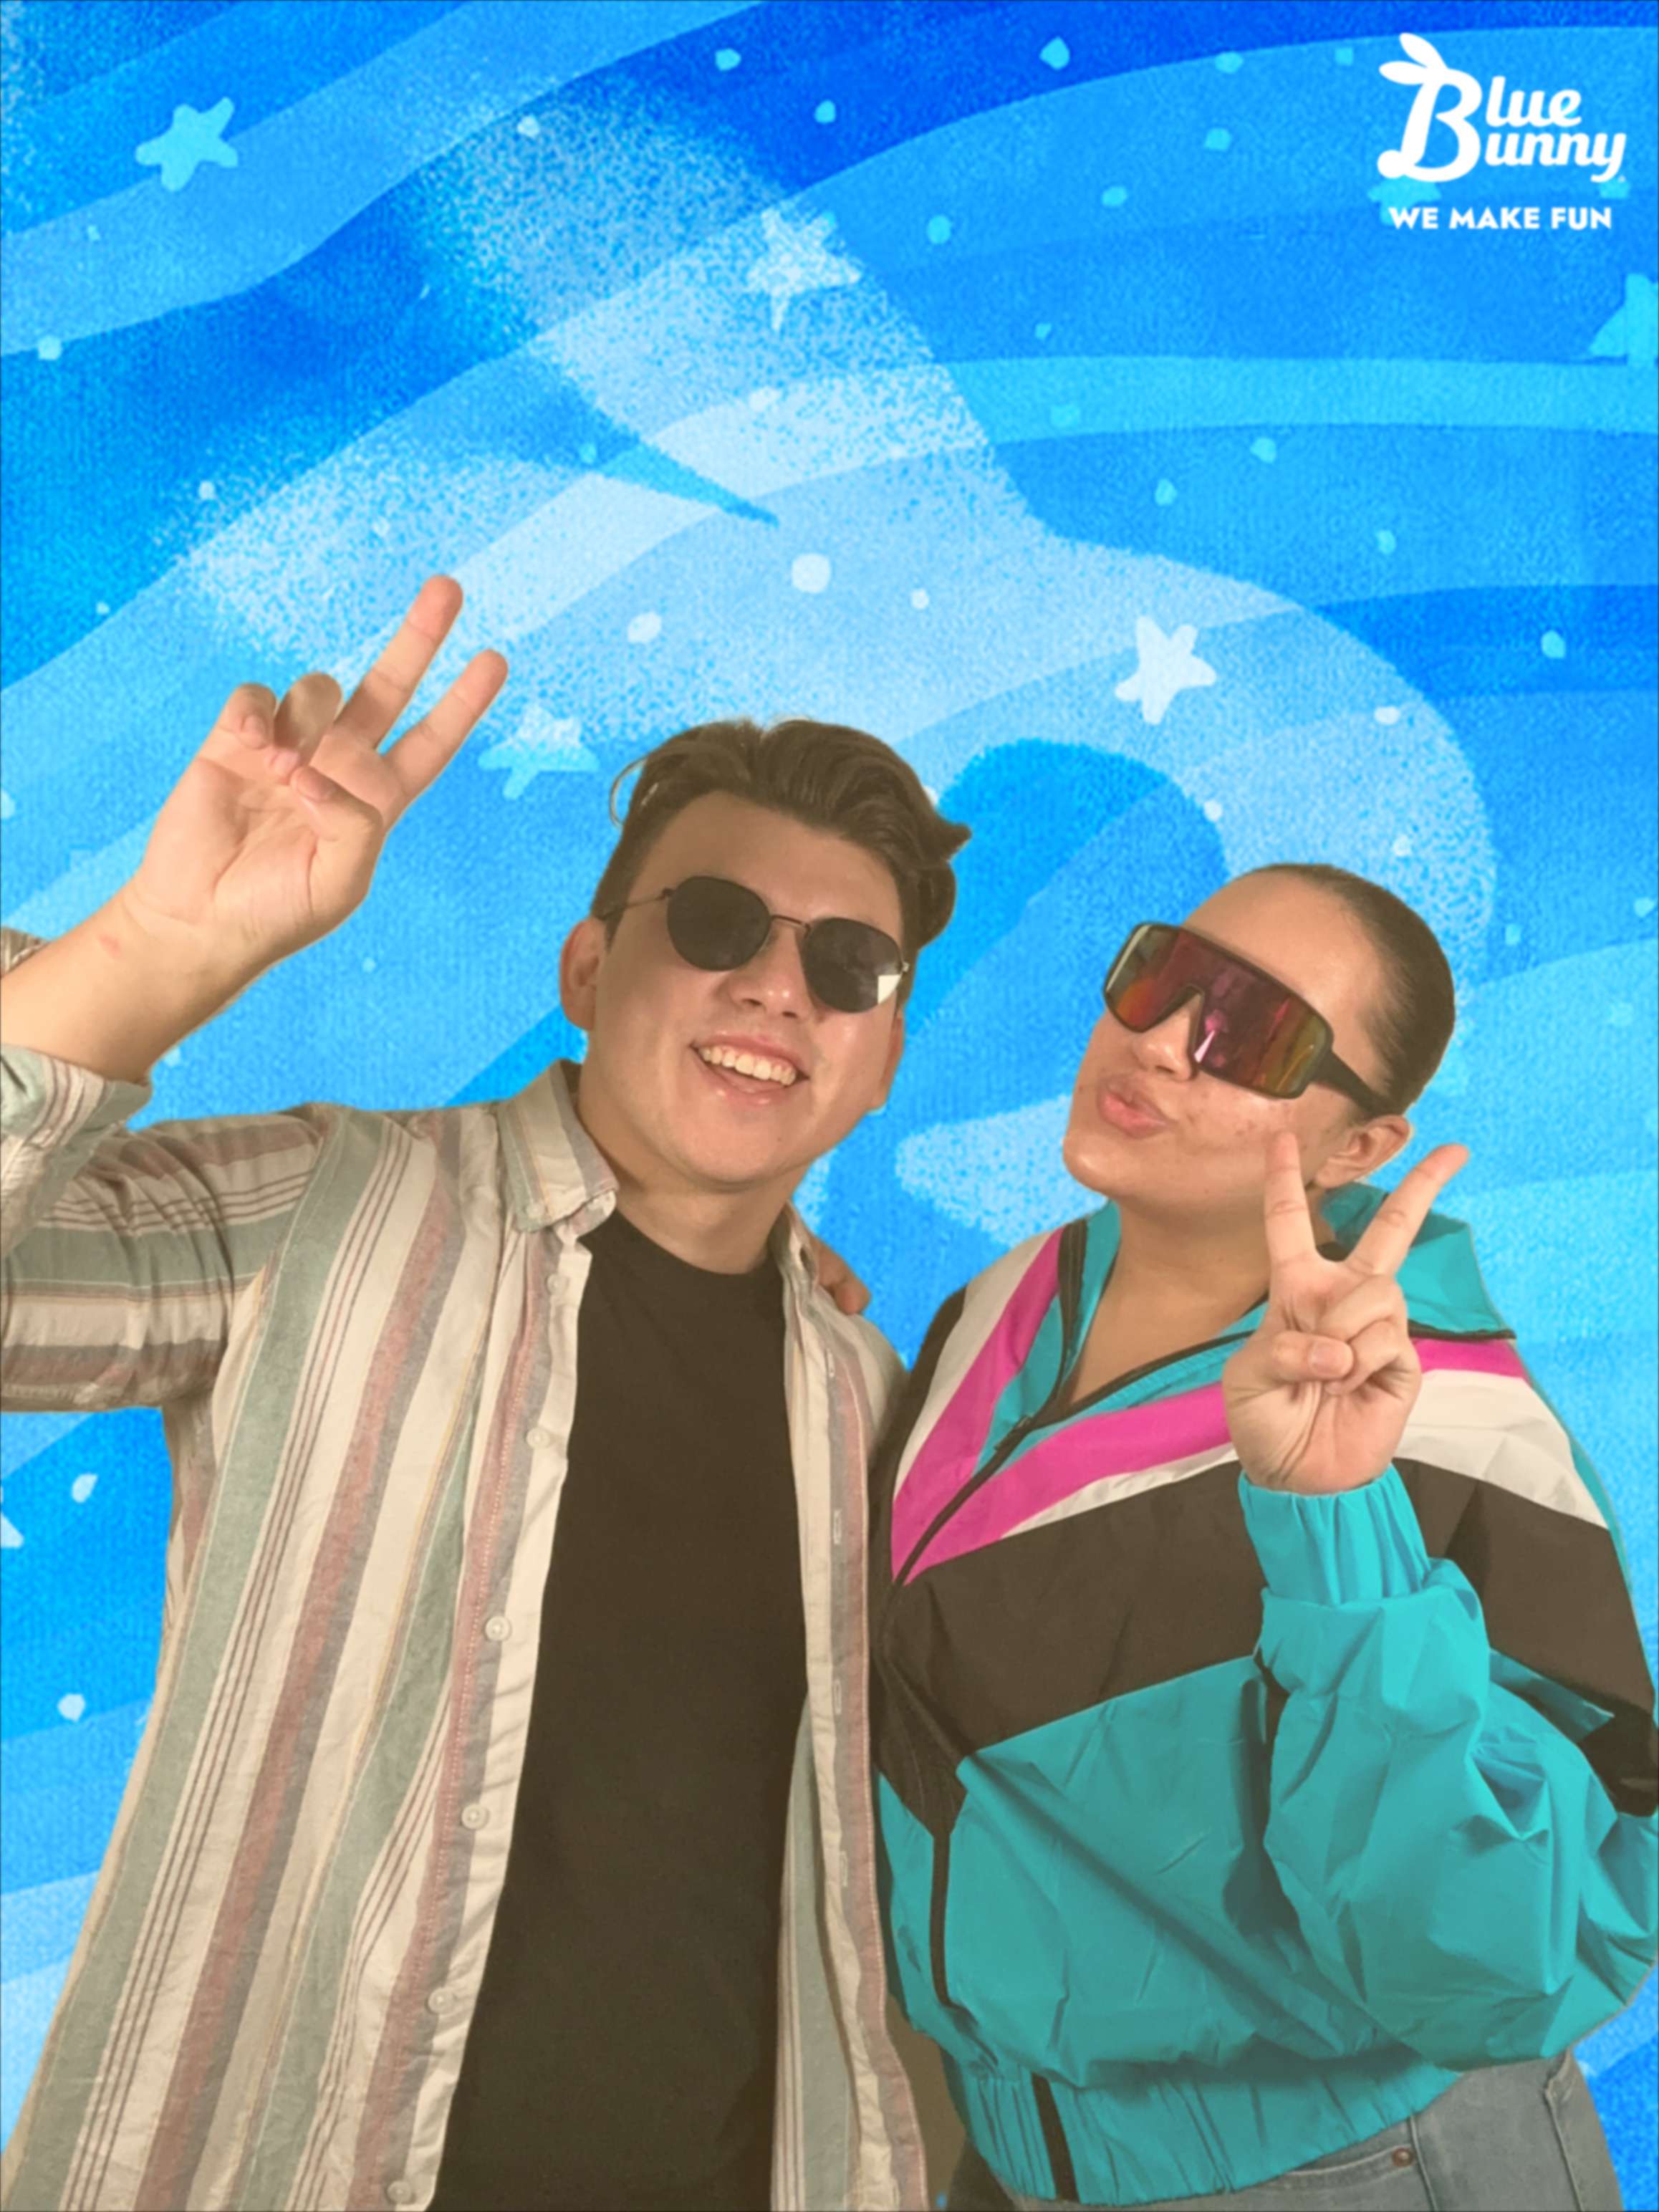 A young couple giving peace signs in sunglasses